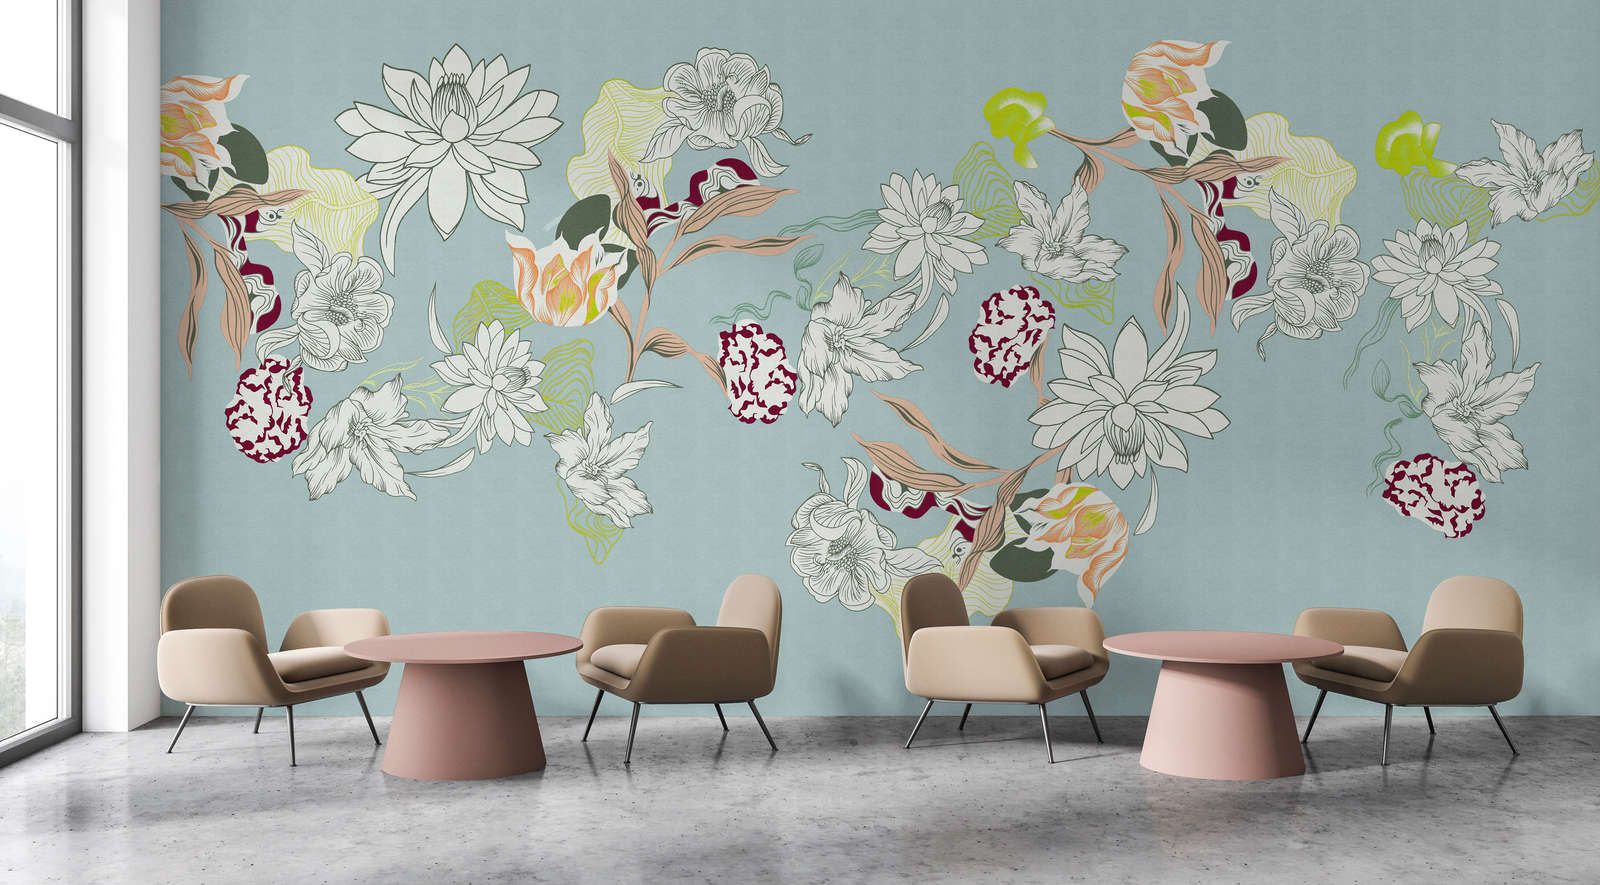             Photo wallpaper »botany 2« - Abstract floral motifs with green accents against a subtle linen texture - Matt, smooth non-woven fabric
        